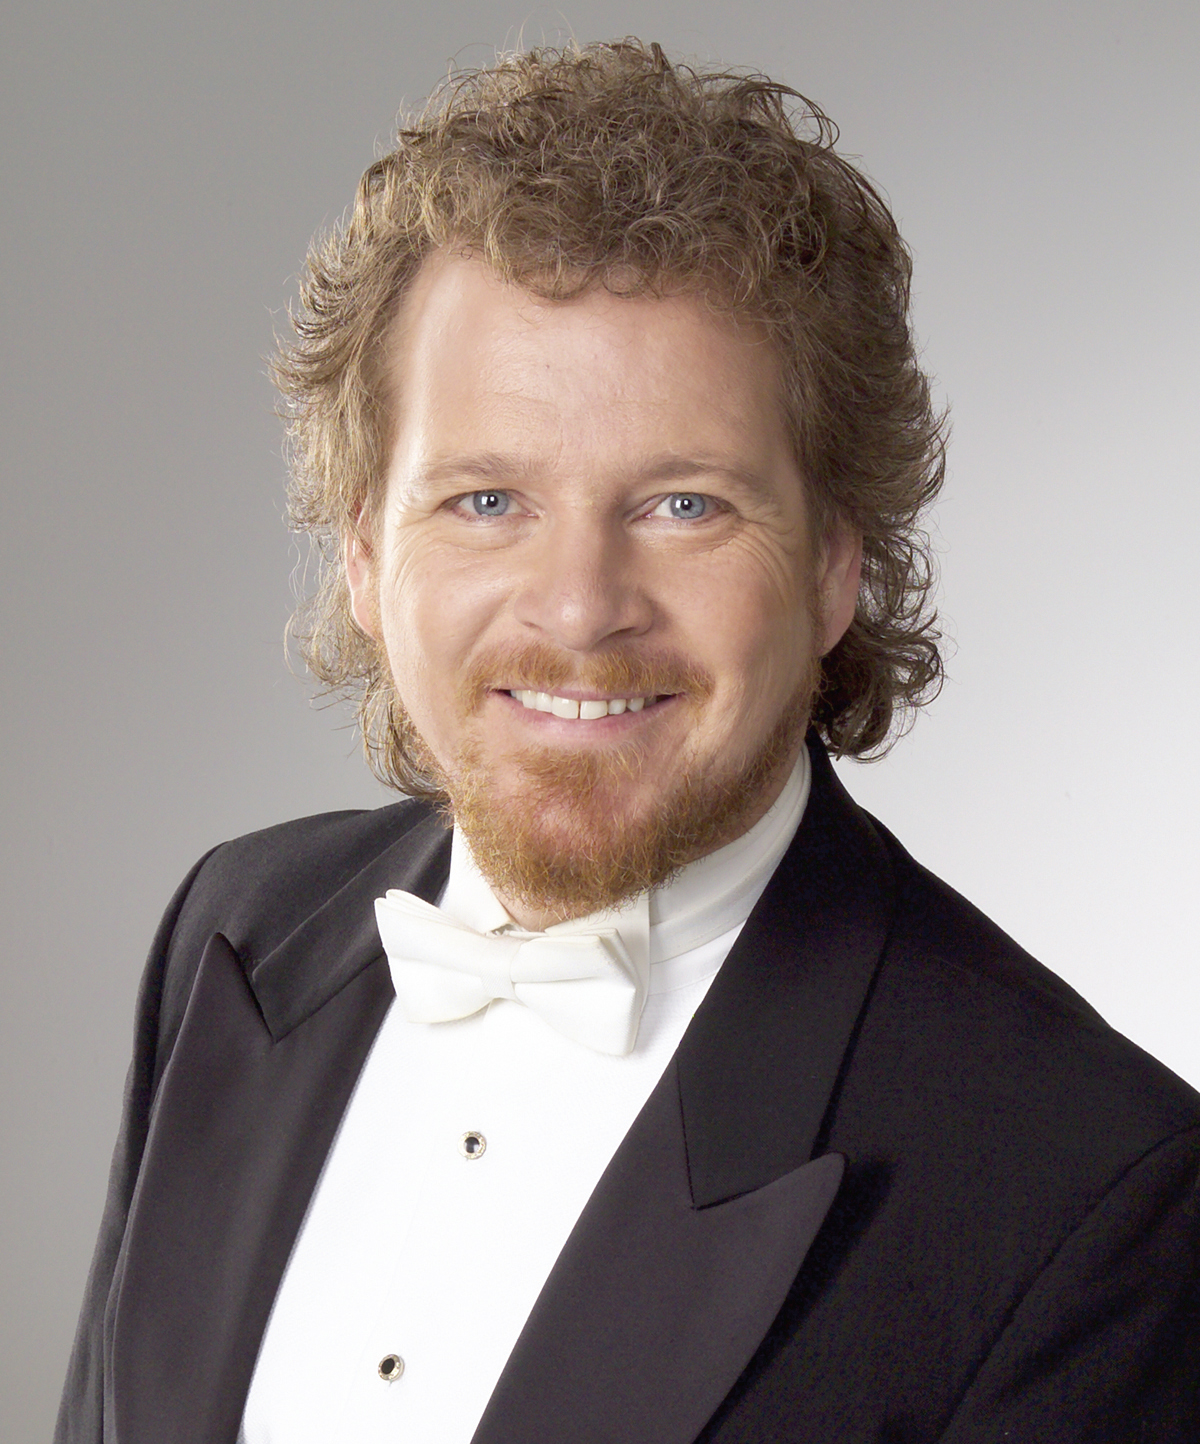 David Stewart Wiley, music director and conductor, Roanoke Symphony Orchestra